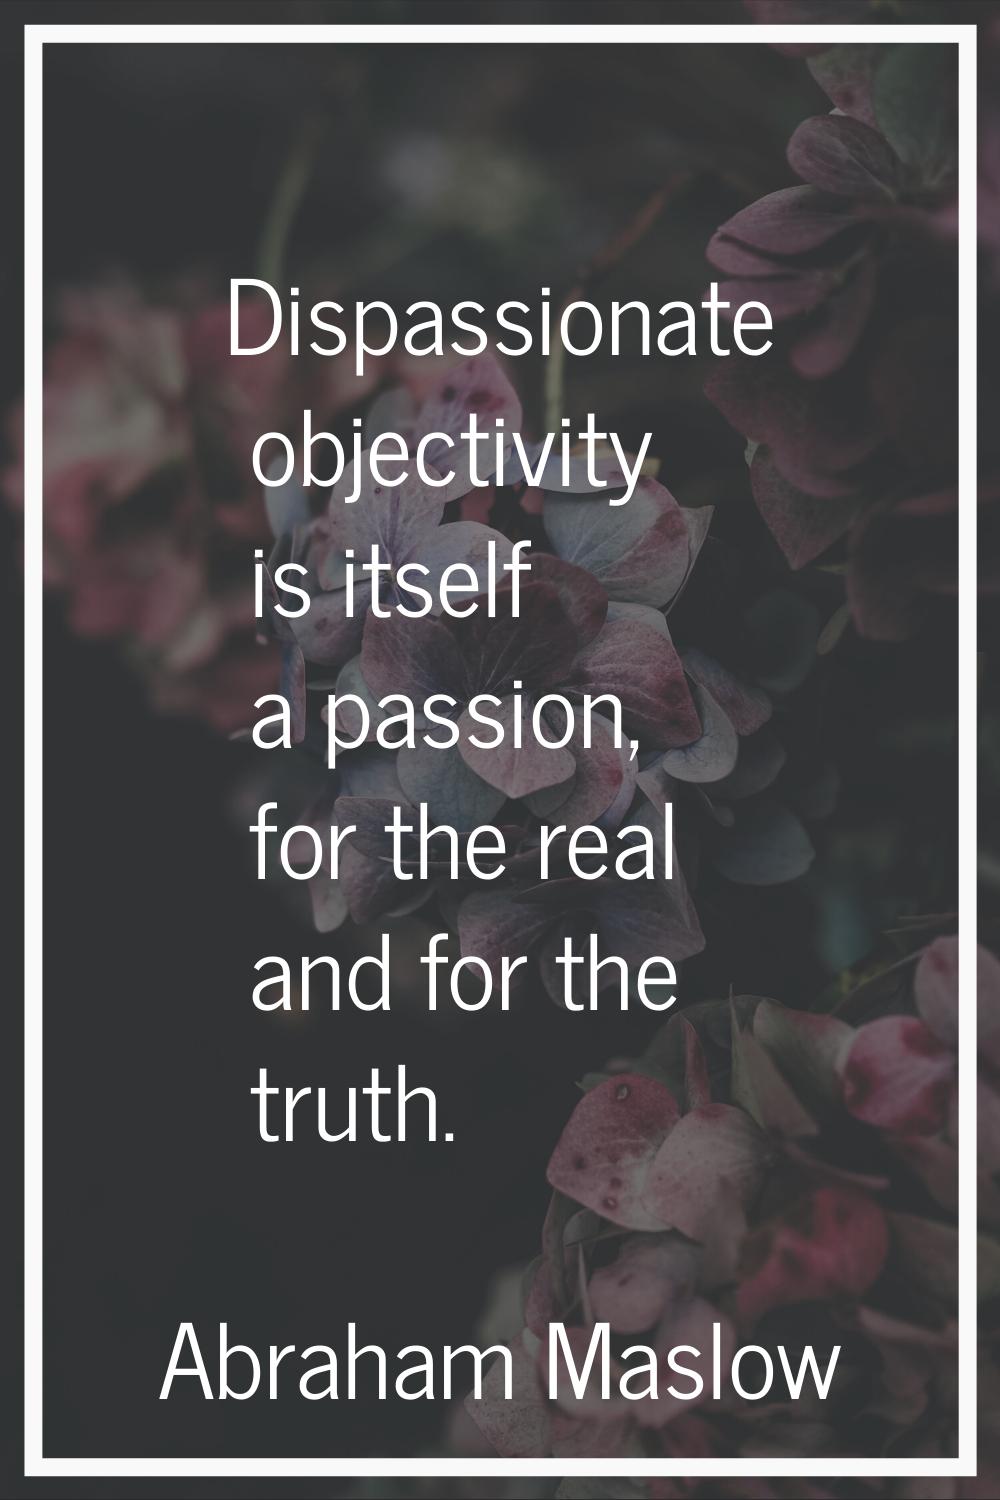 Dispassionate objectivity is itself a passion, for the real and for the truth.